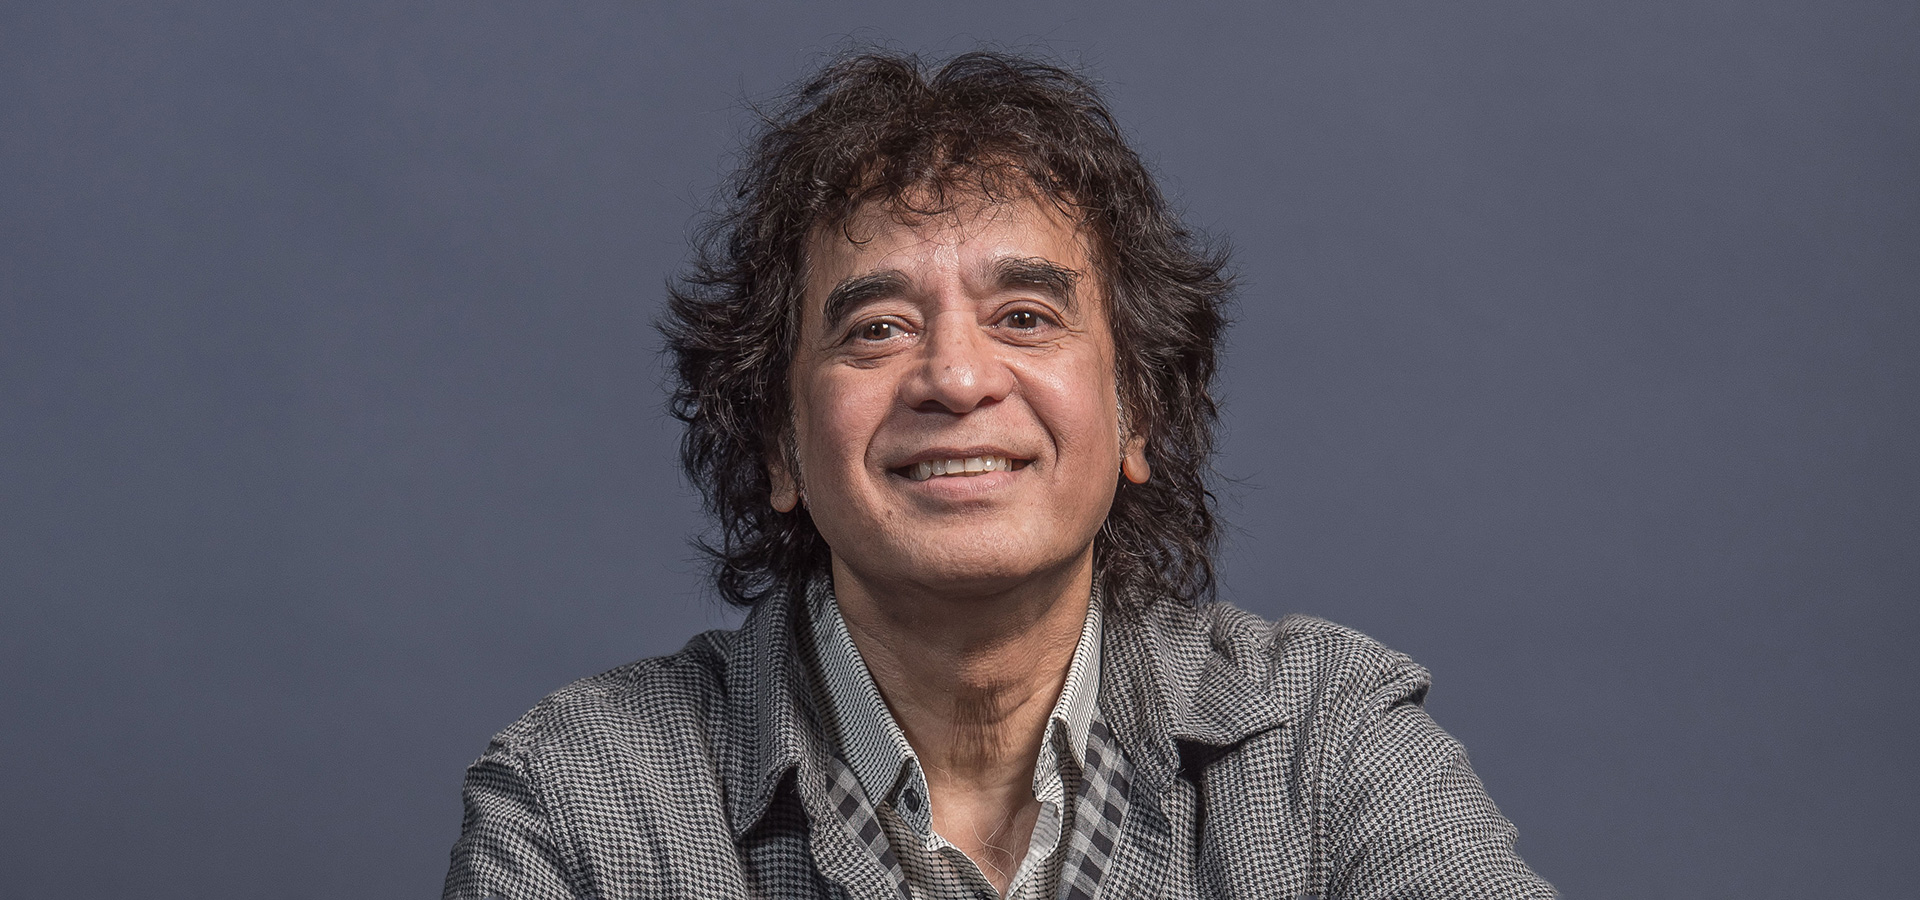 Zakir Hussain, a man with dark curly hair and bright brown eyes, smiles for the camera against a cool grey background.